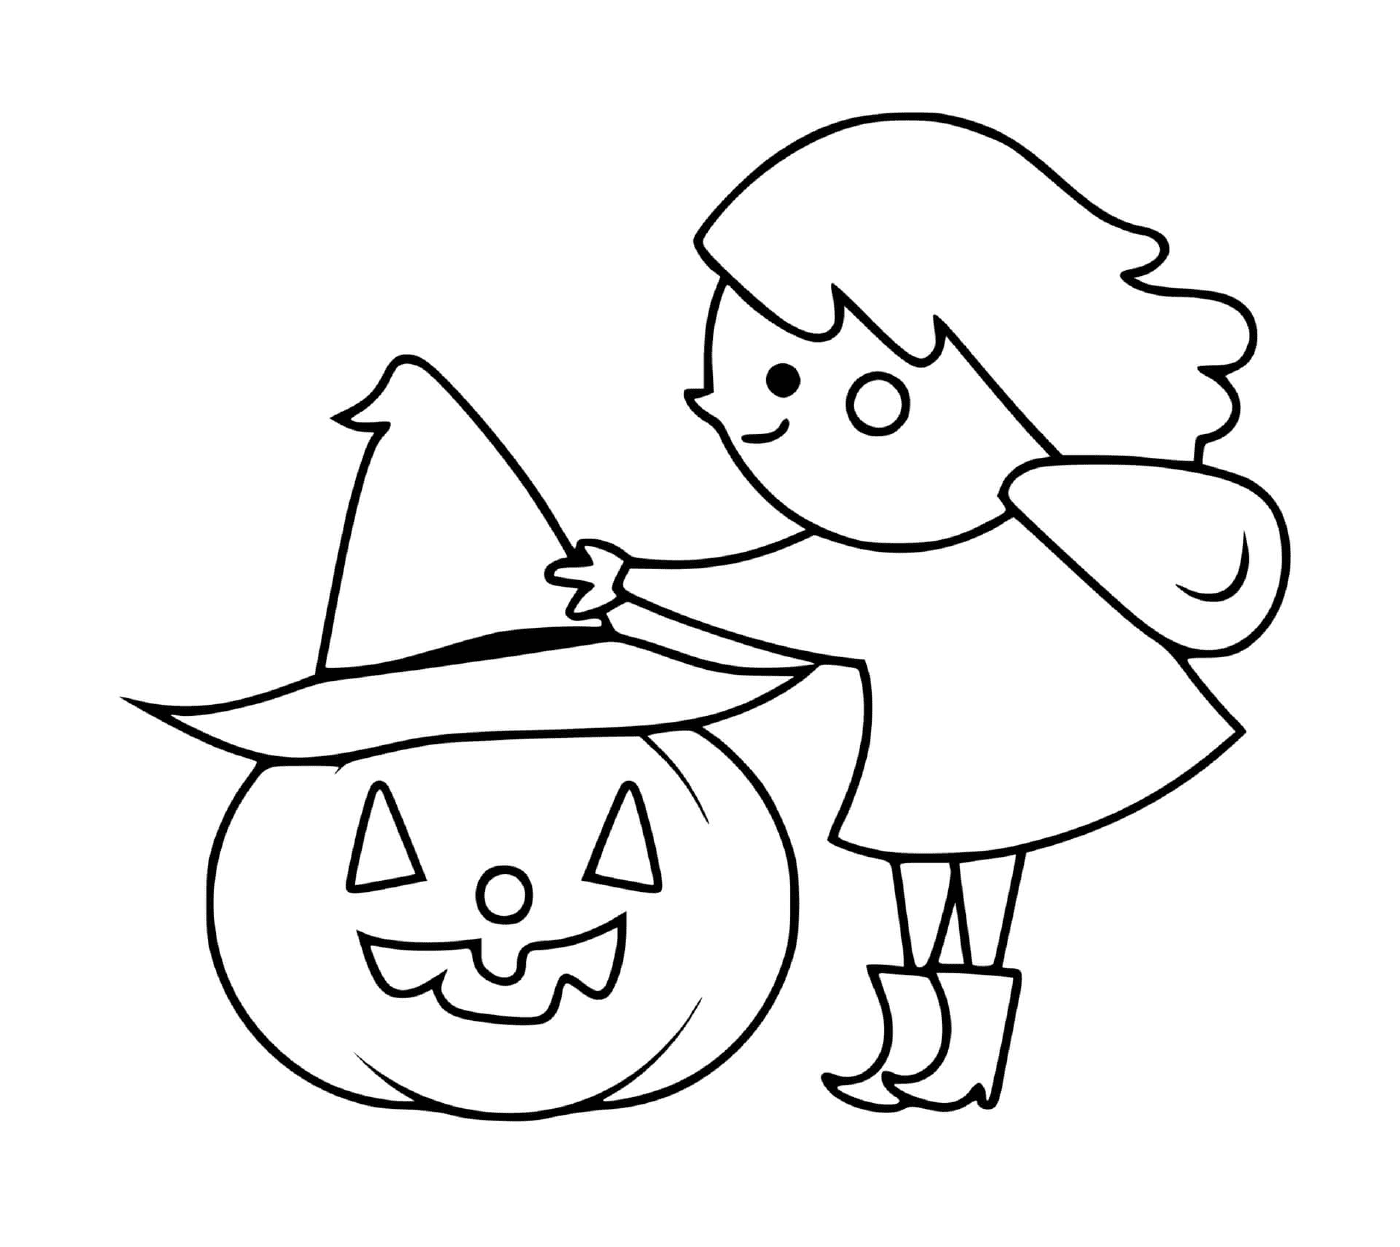  witch offers her pumpkin hat 